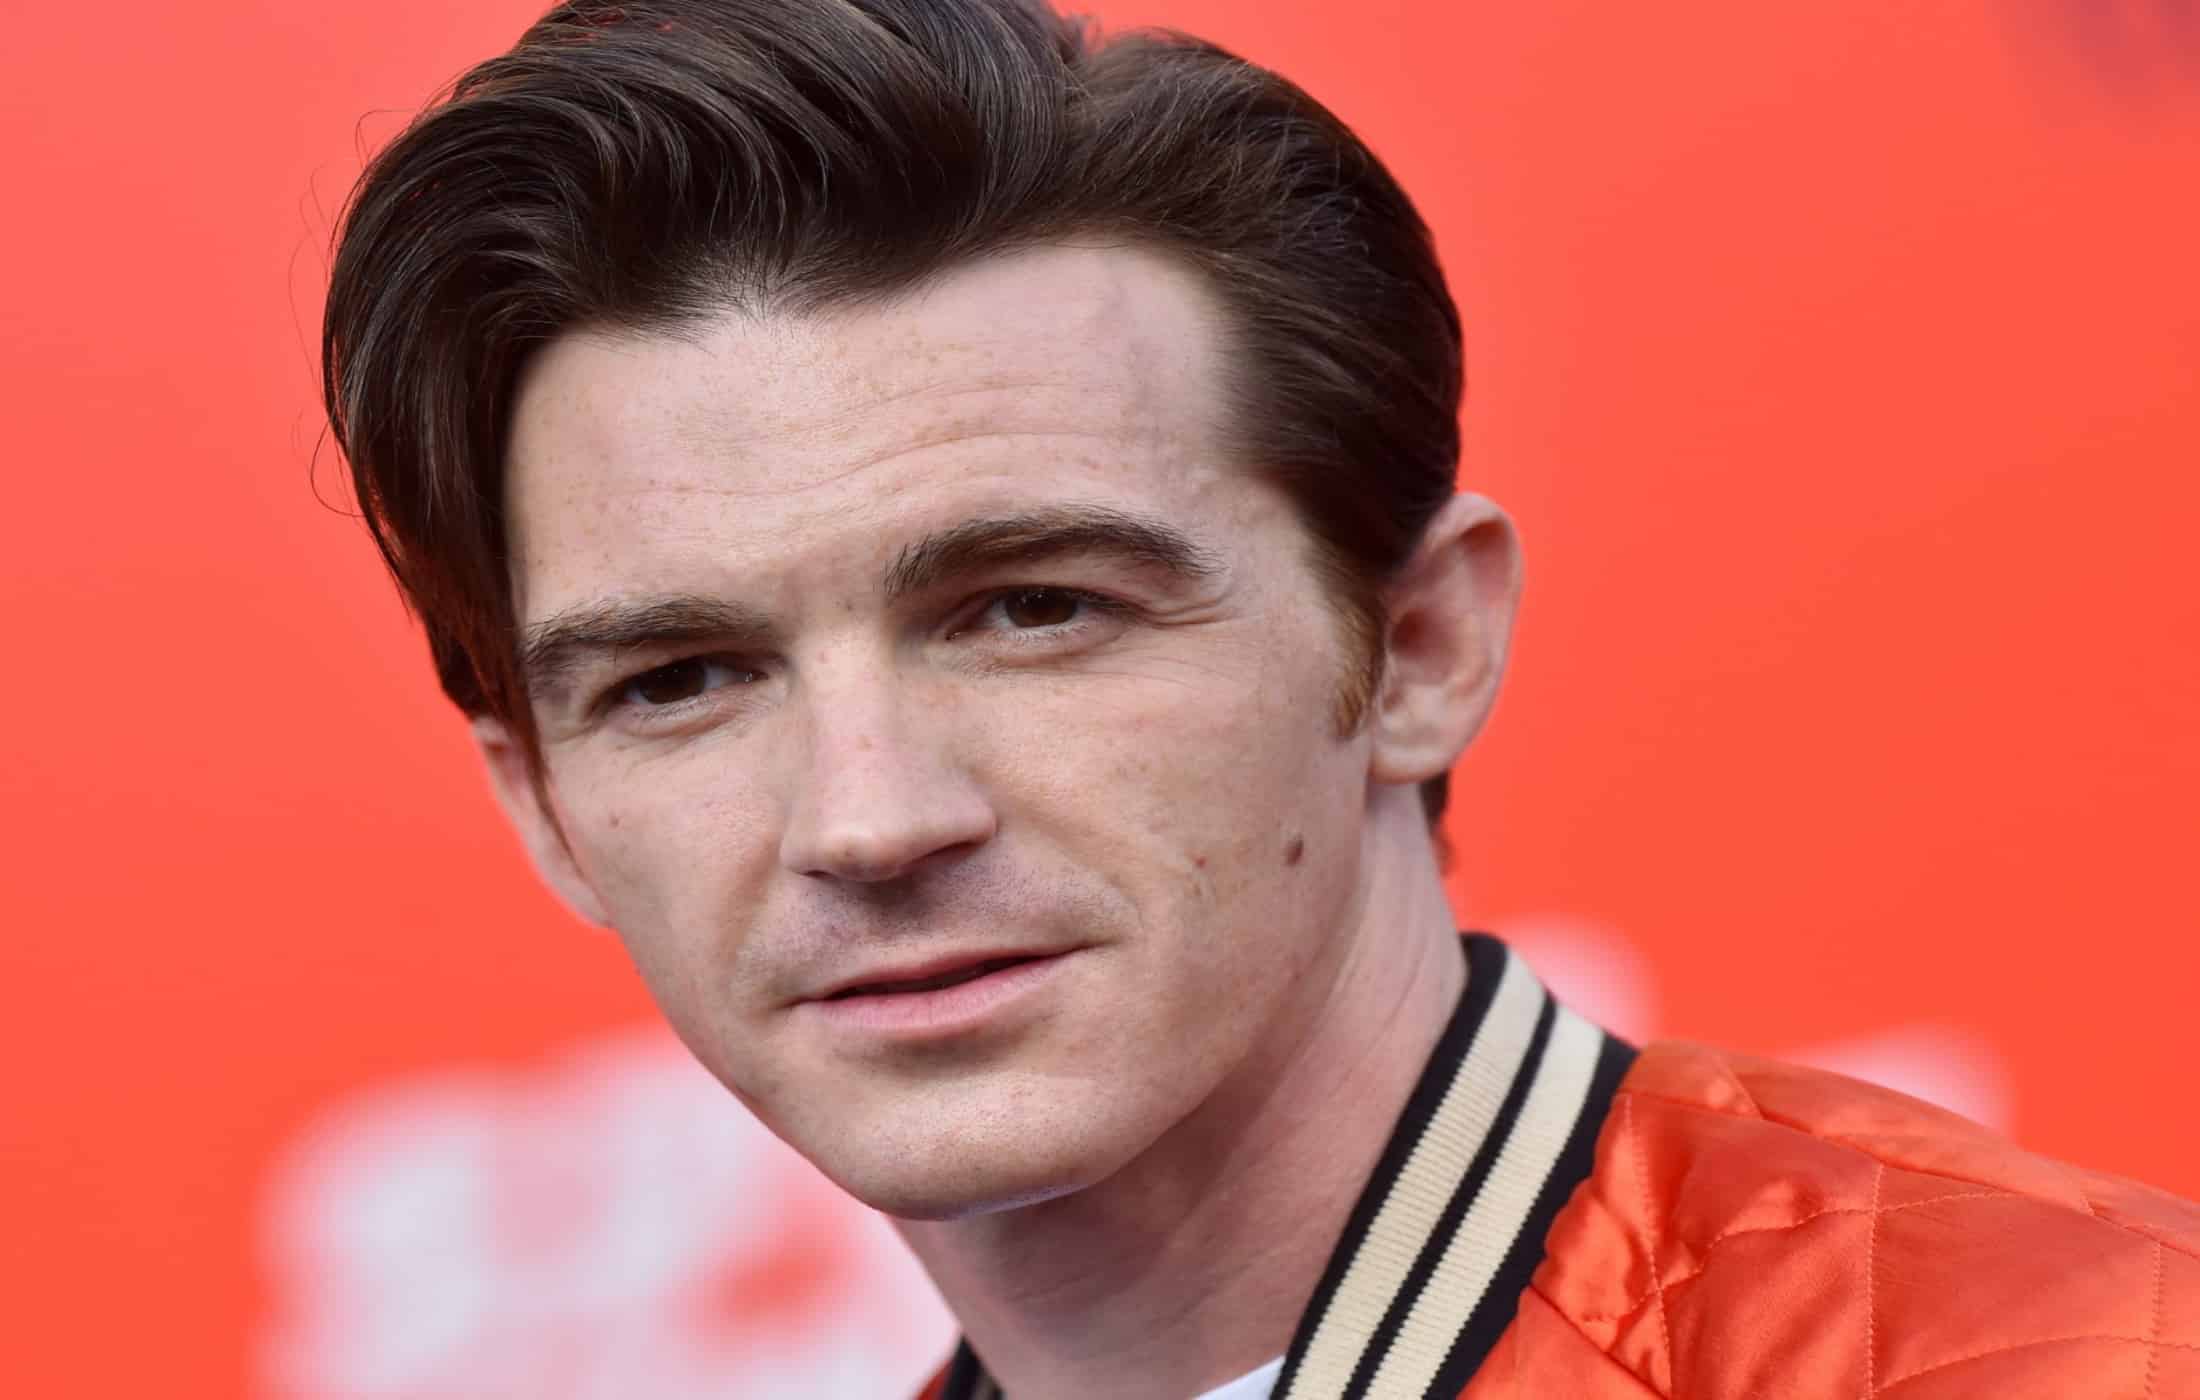 Drake Bell net worth, height, age, wiki, biography, and latest updates